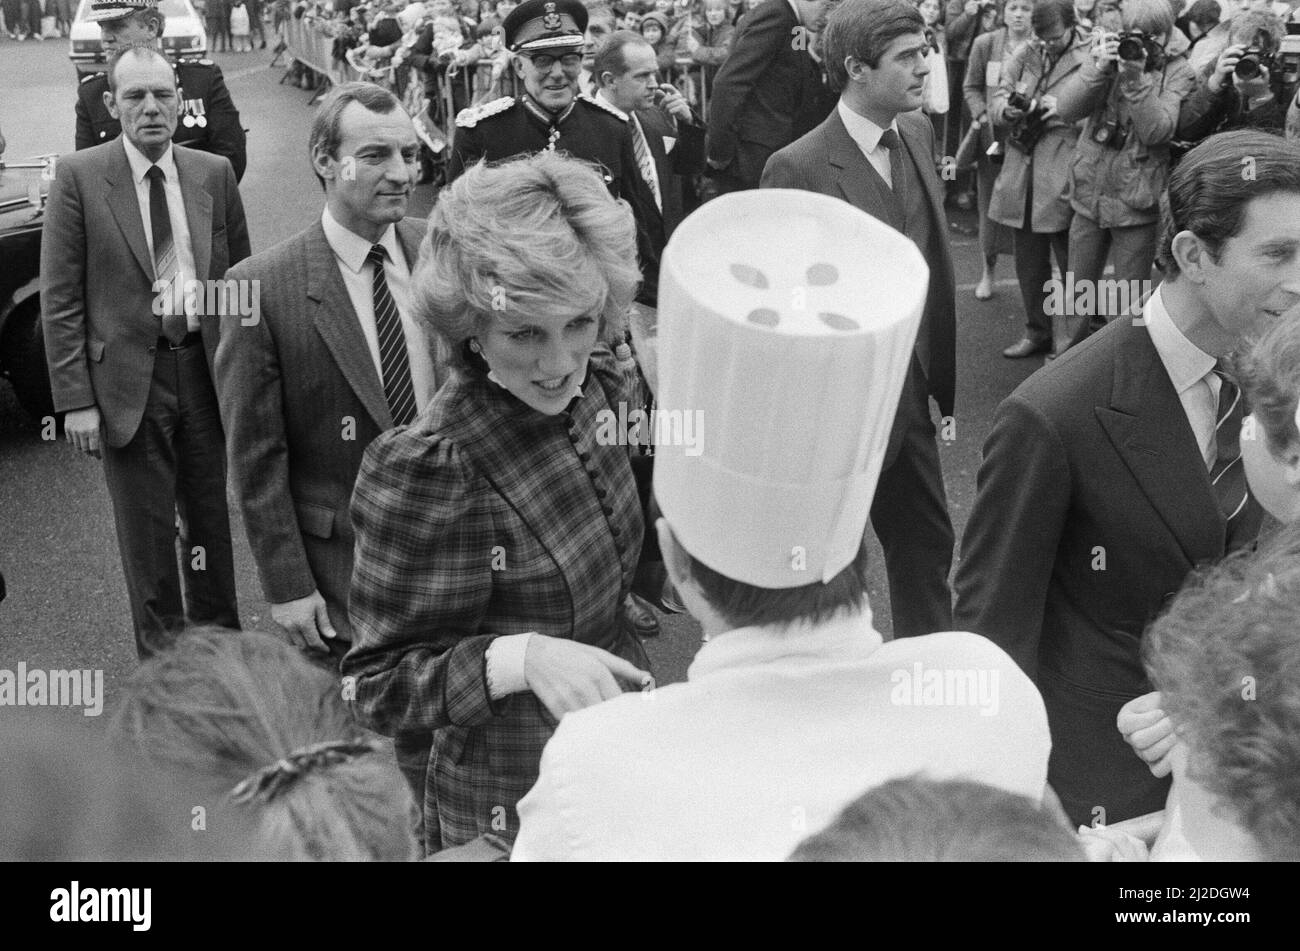 The Prince and Princess of Wales visit Mid Glamorgan in Wales.On this visit, they meet the local well-wishers outside a newly electronics plant.  Picture shows Princess Diana's  bodyguard Barry Mannakee wearing a diagonal striped tie and slight pin striped jacket (standing behind Diana).  Princess Diana, centre wearing tartan, and far right is Prince Charles.  Picture taken 29th January 1985 Stock Photo